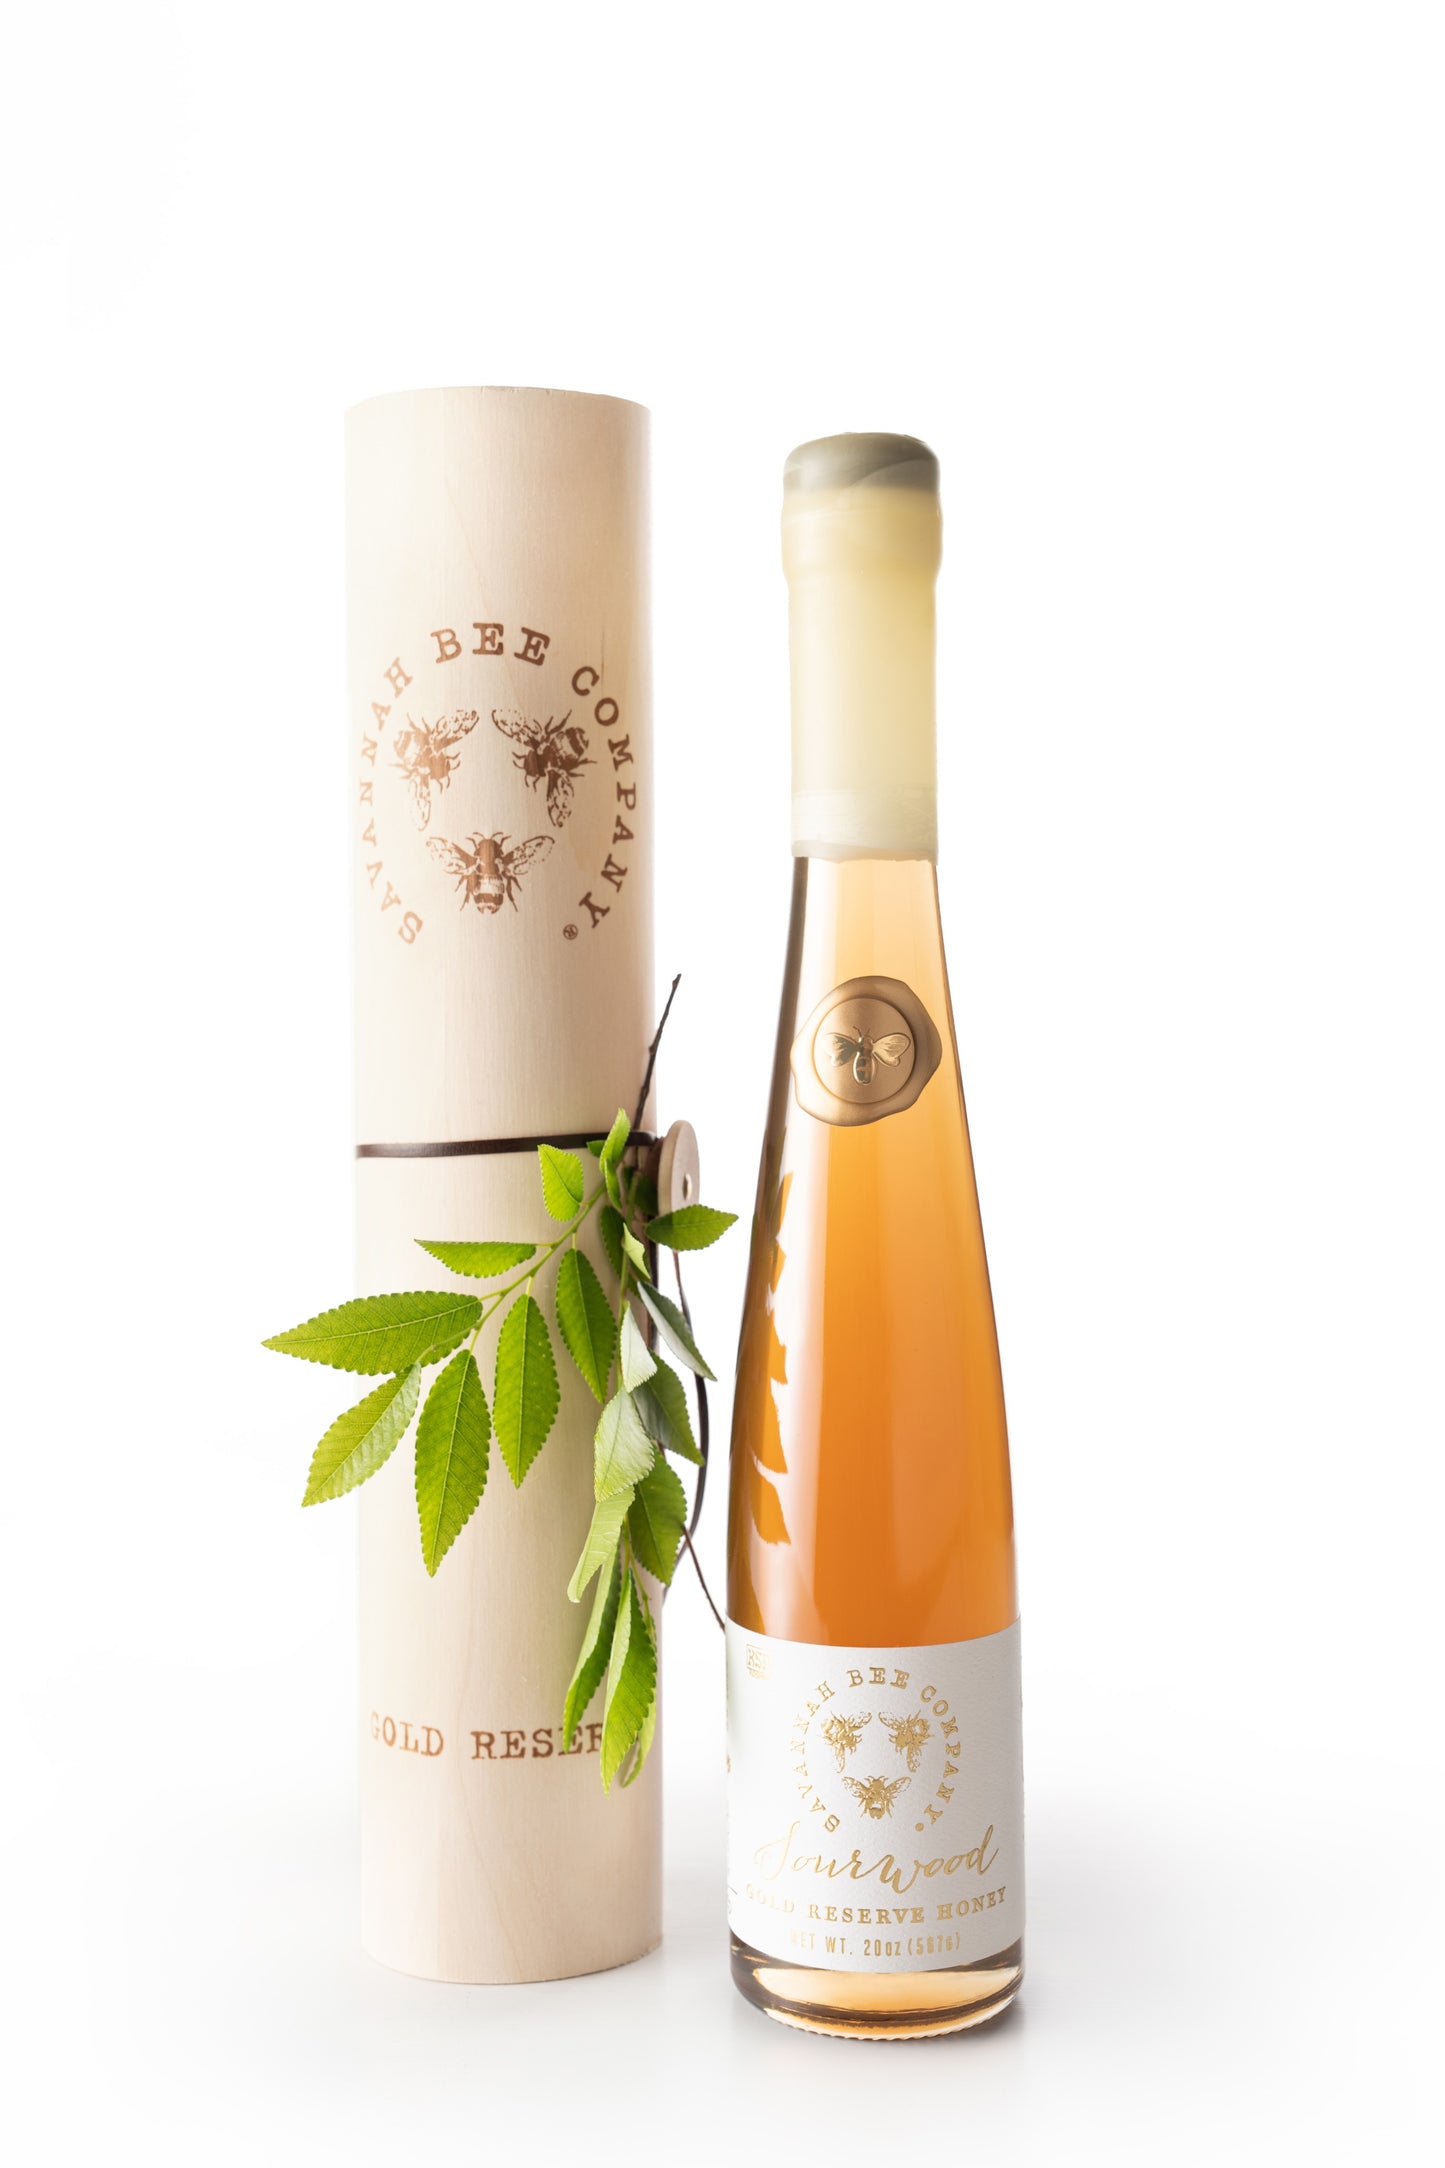 20 ounce Sourwood gold reserve honey flute with decorative box and a sprig of green leaves.